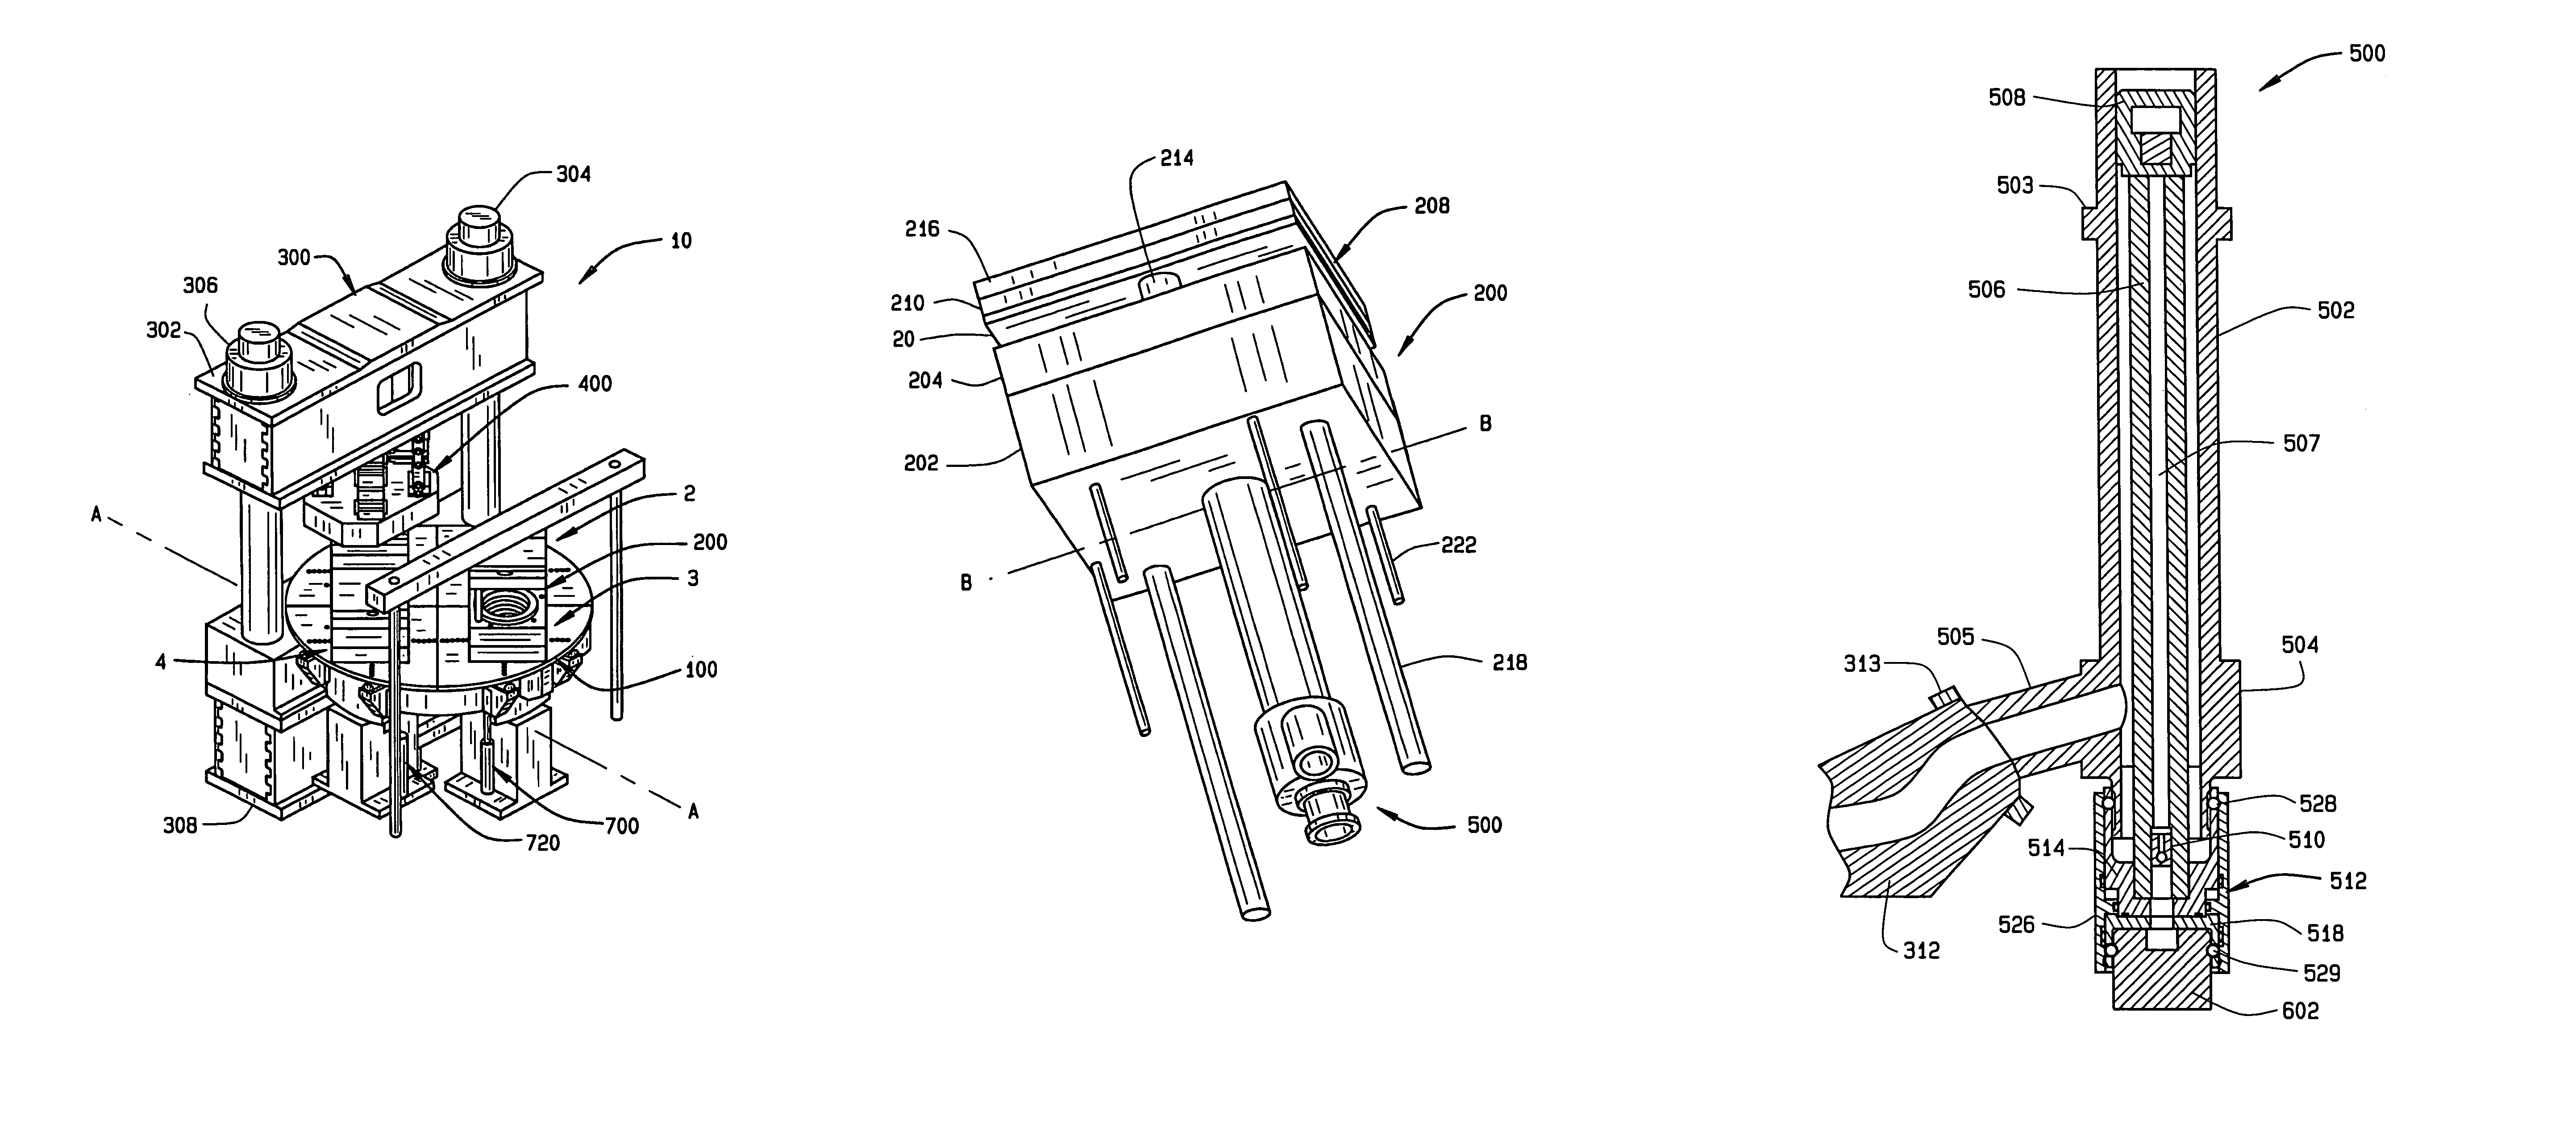 Apparatus and method for simultaneous usage of multiple die casting tools